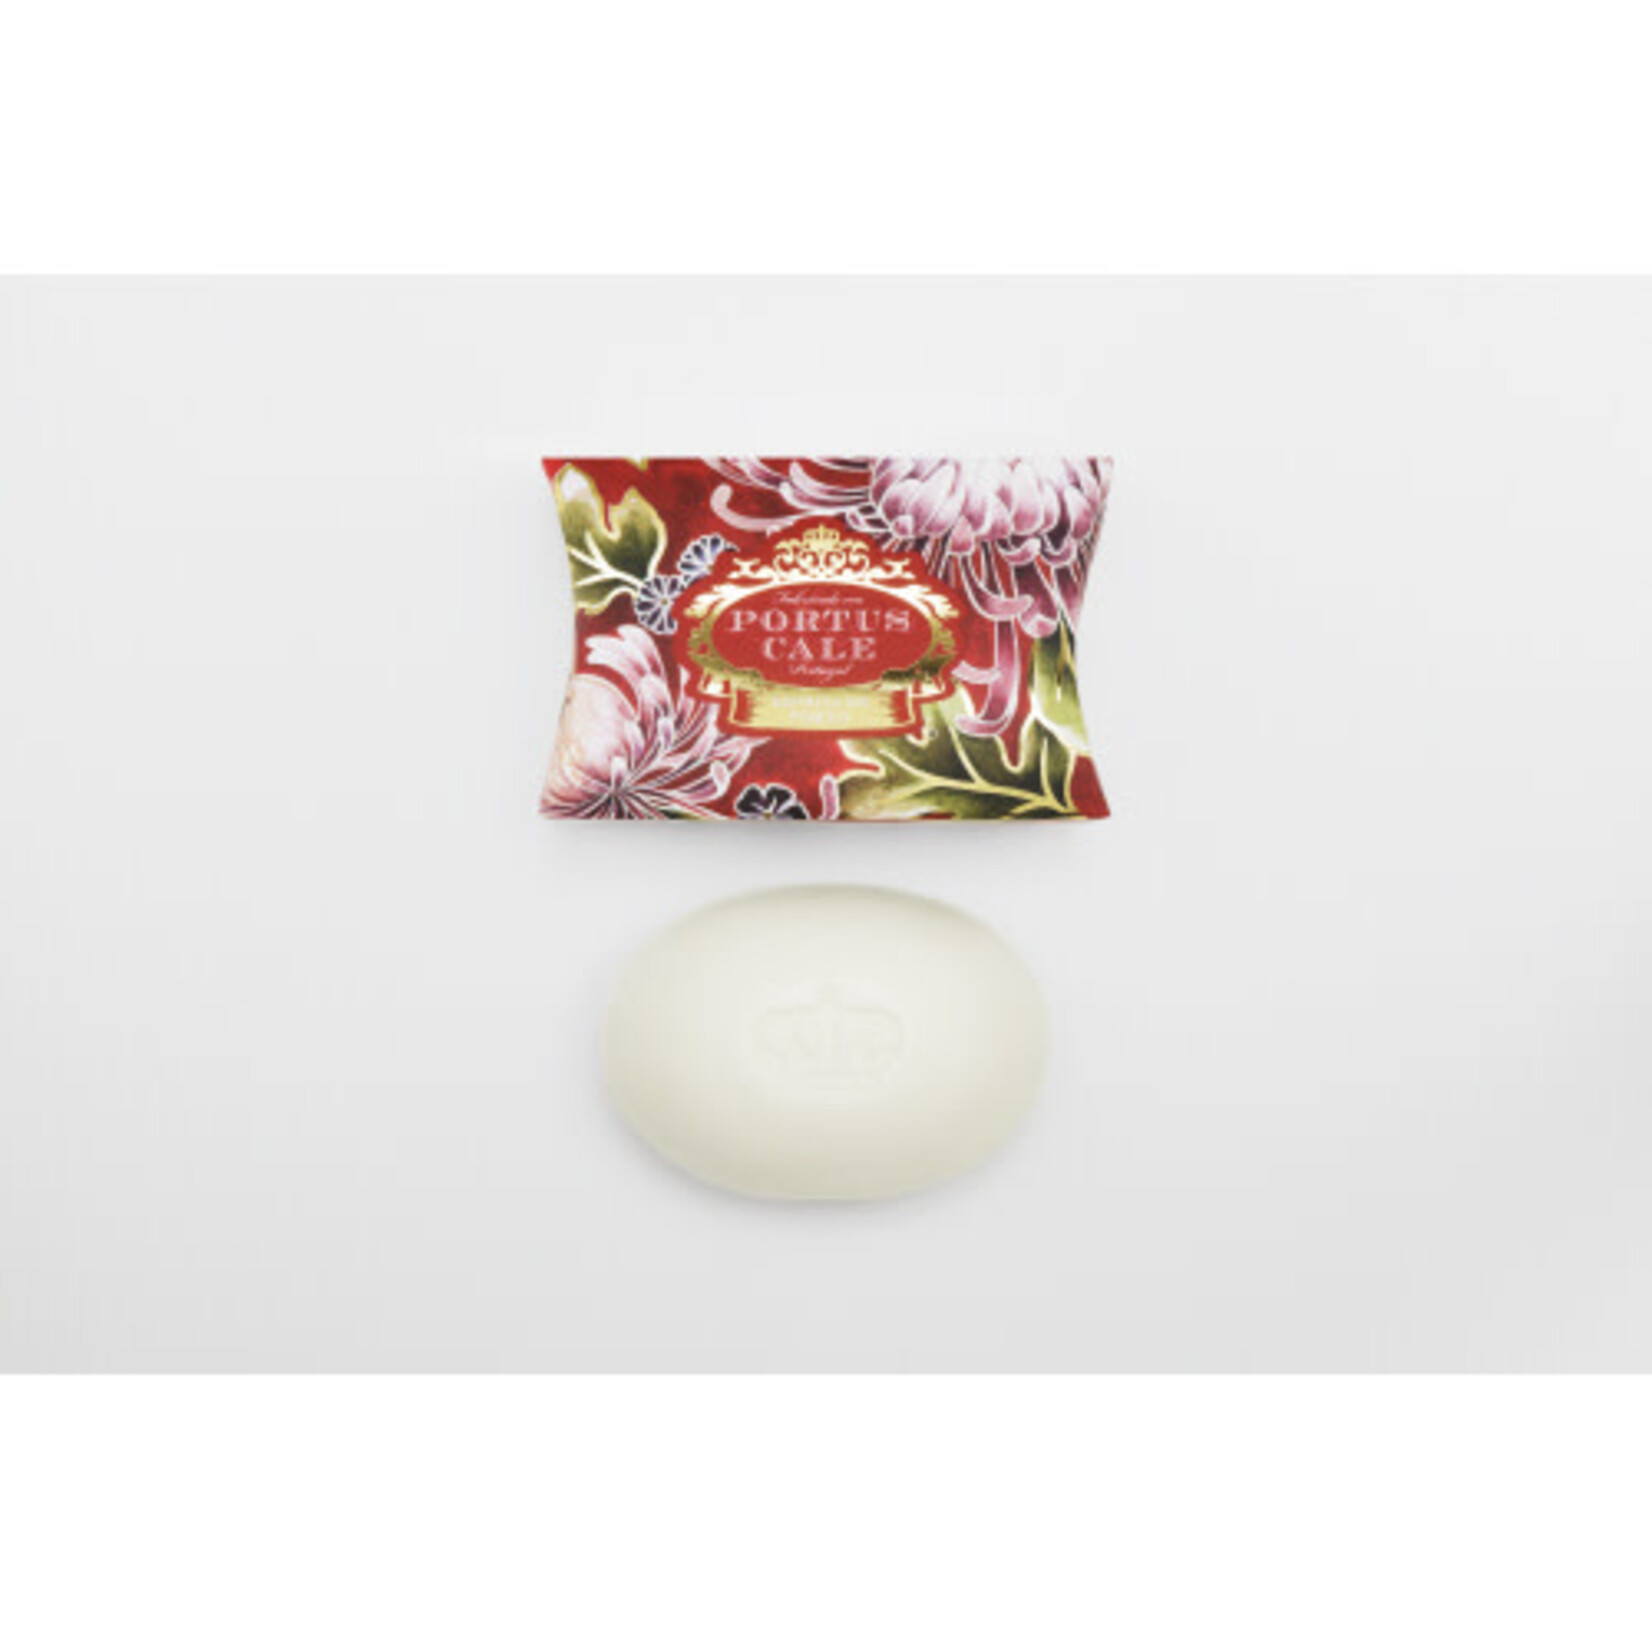 Portus Cale Ruby Red 40g Soap